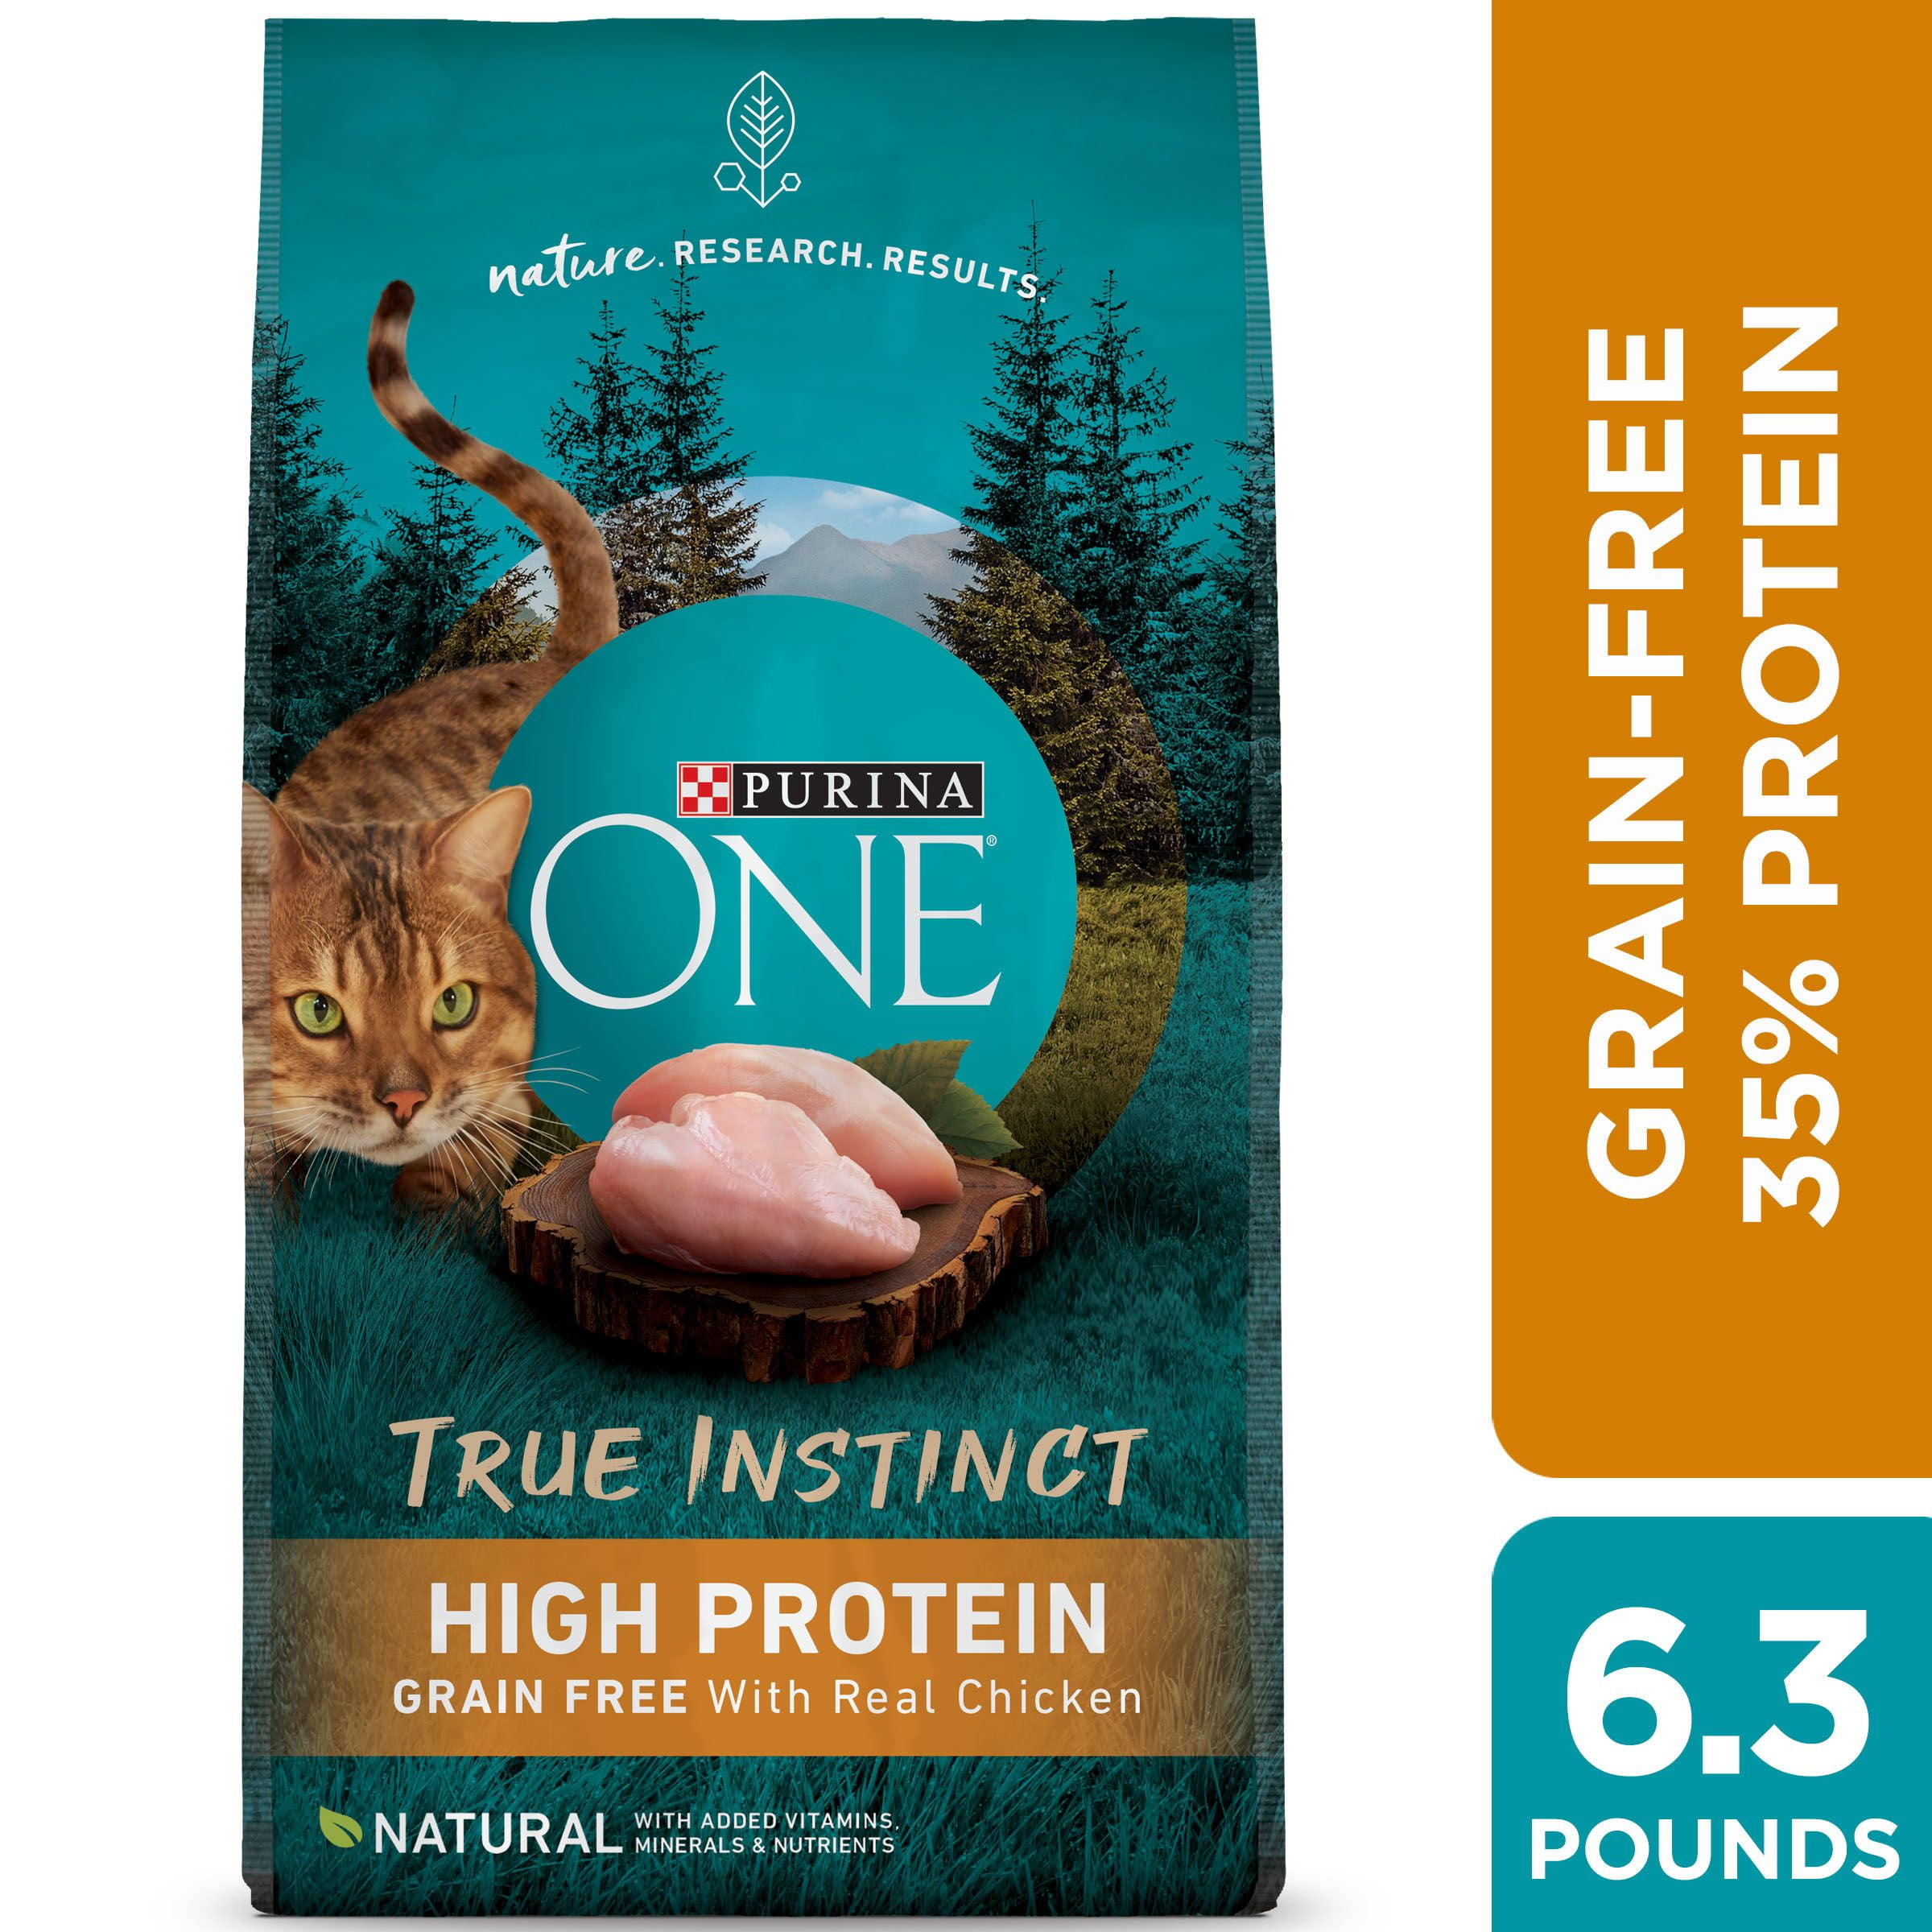 Purina ONE Natural, High Protein, Grain Free Dry Cat Food, True